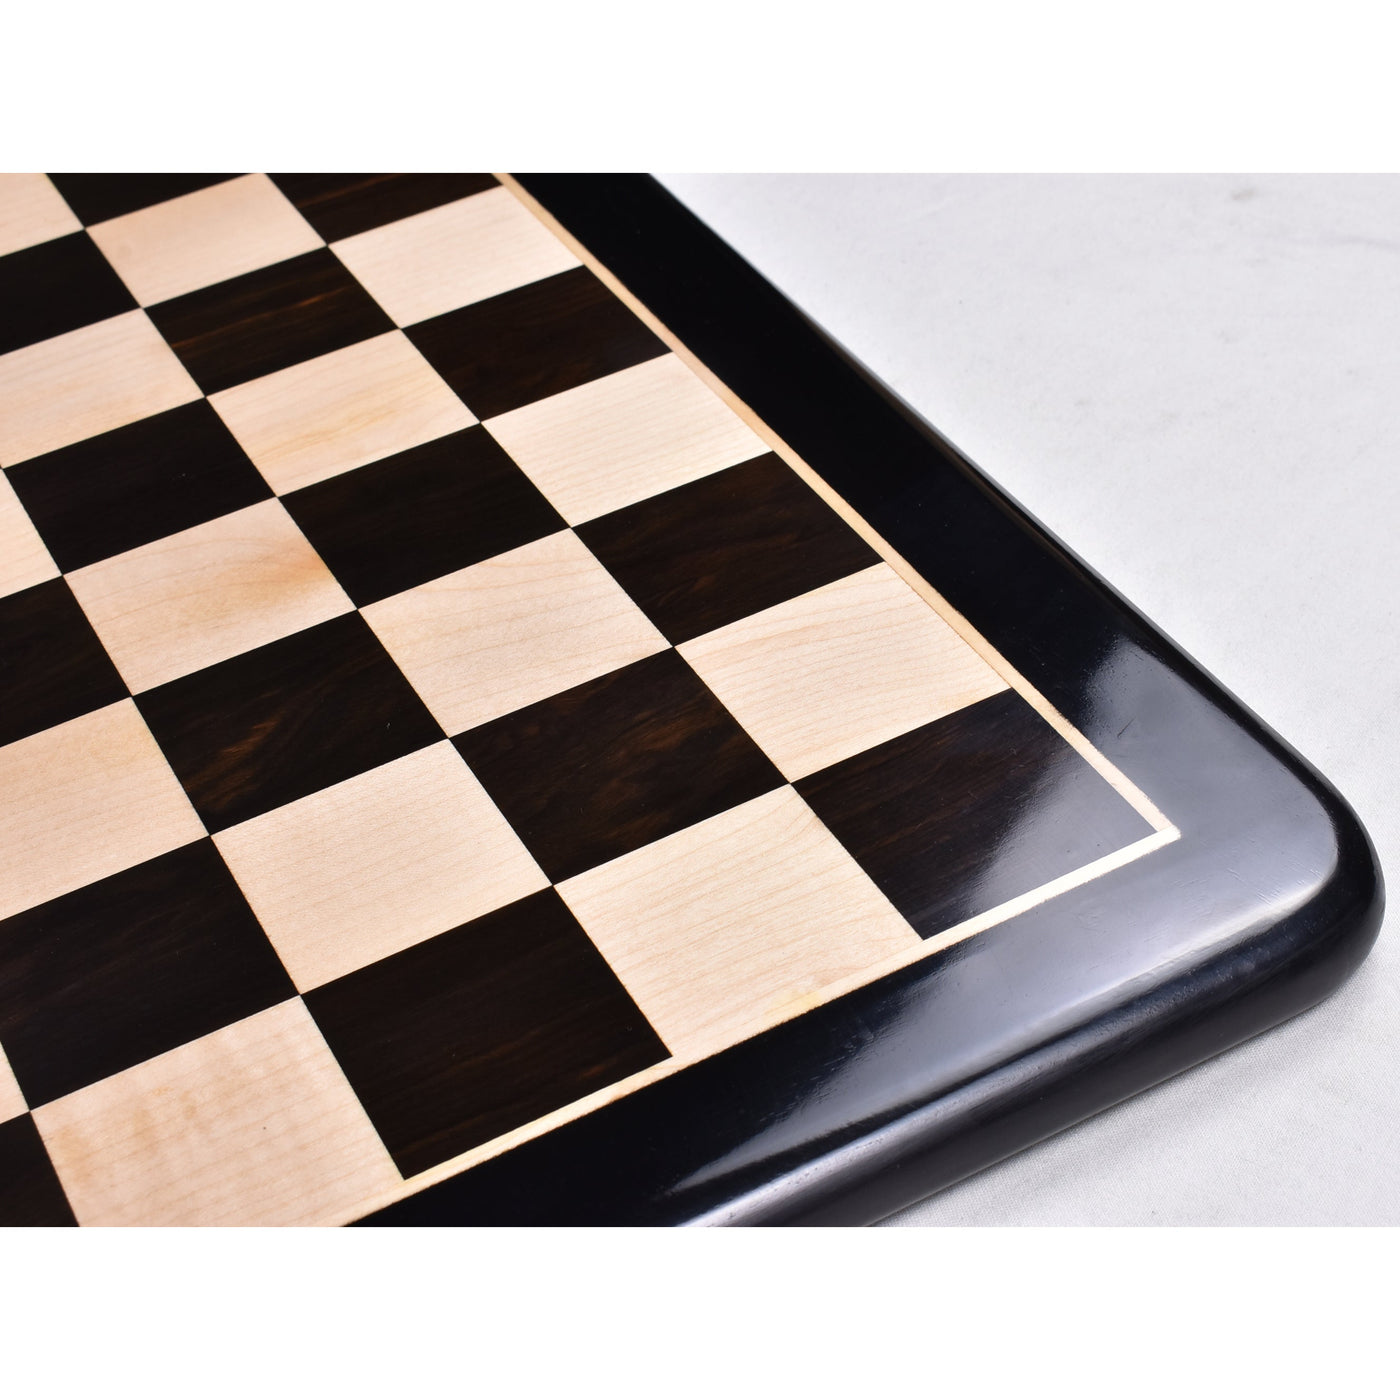 19 inches Large Solid Inlaid Ebony Chess board | flat chess board | Royalchessmall